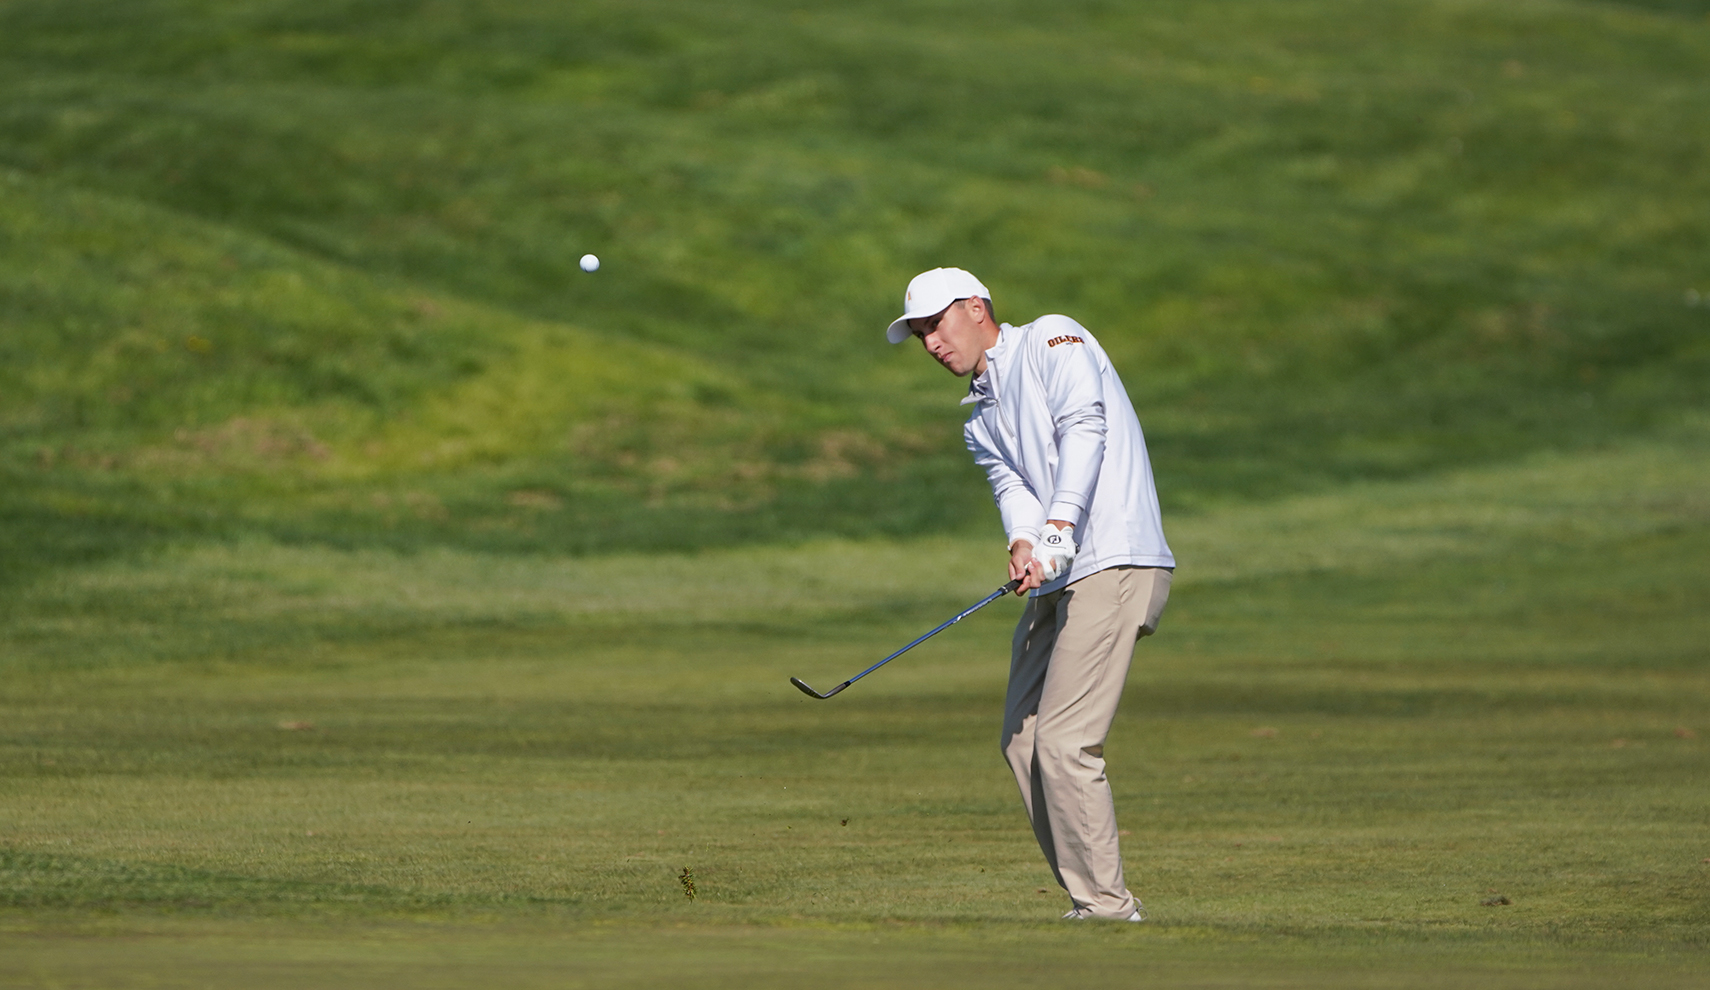 Male golfer chipping ball onto green from the fairway